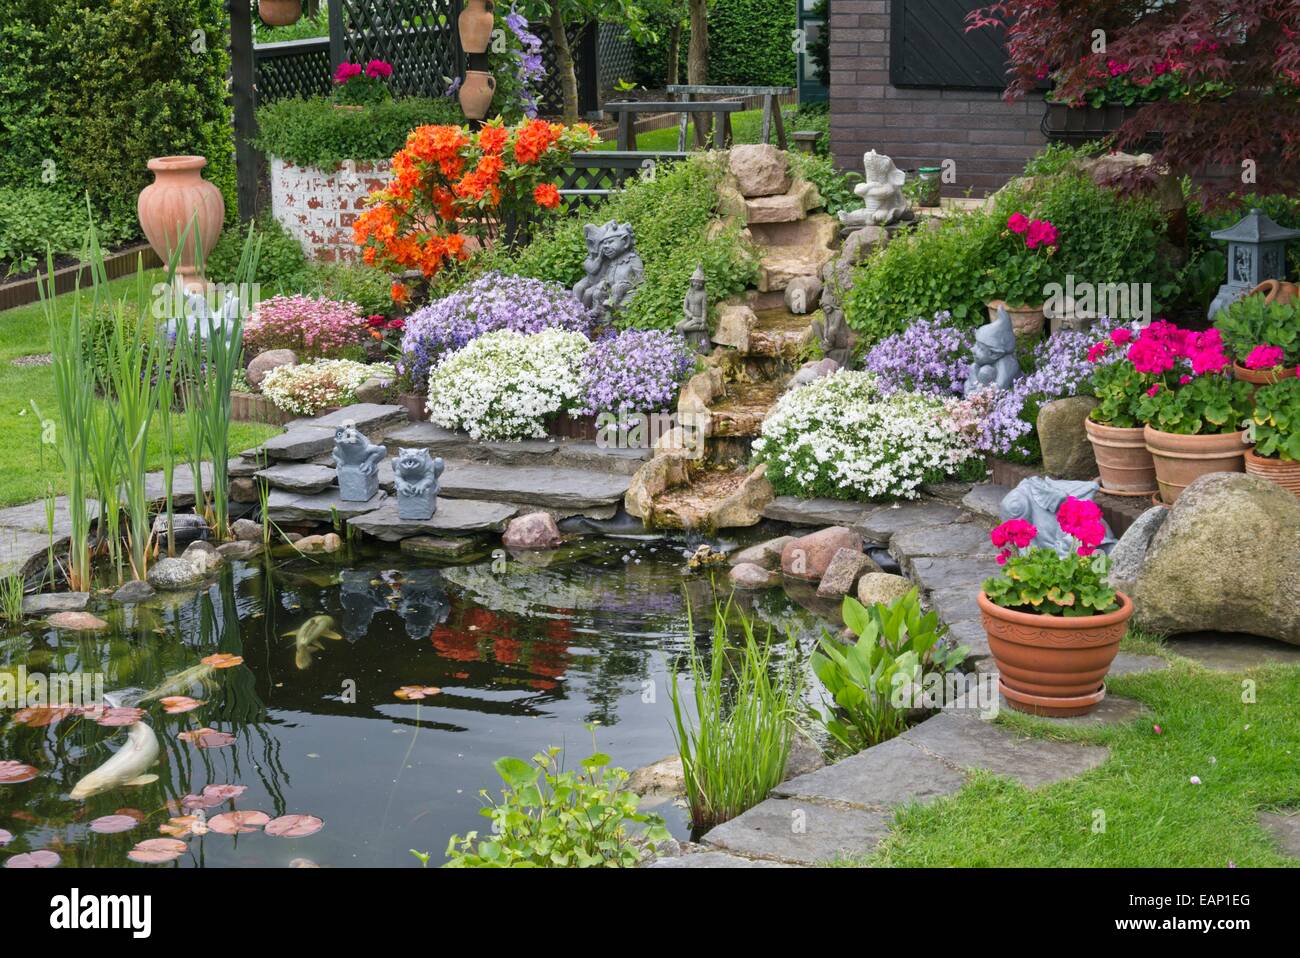 Koi pond with rhododendrons (Rhododendron), garden phlox (Phlox paniculata) and pelargoniums (Pelargonium) Stock Photo